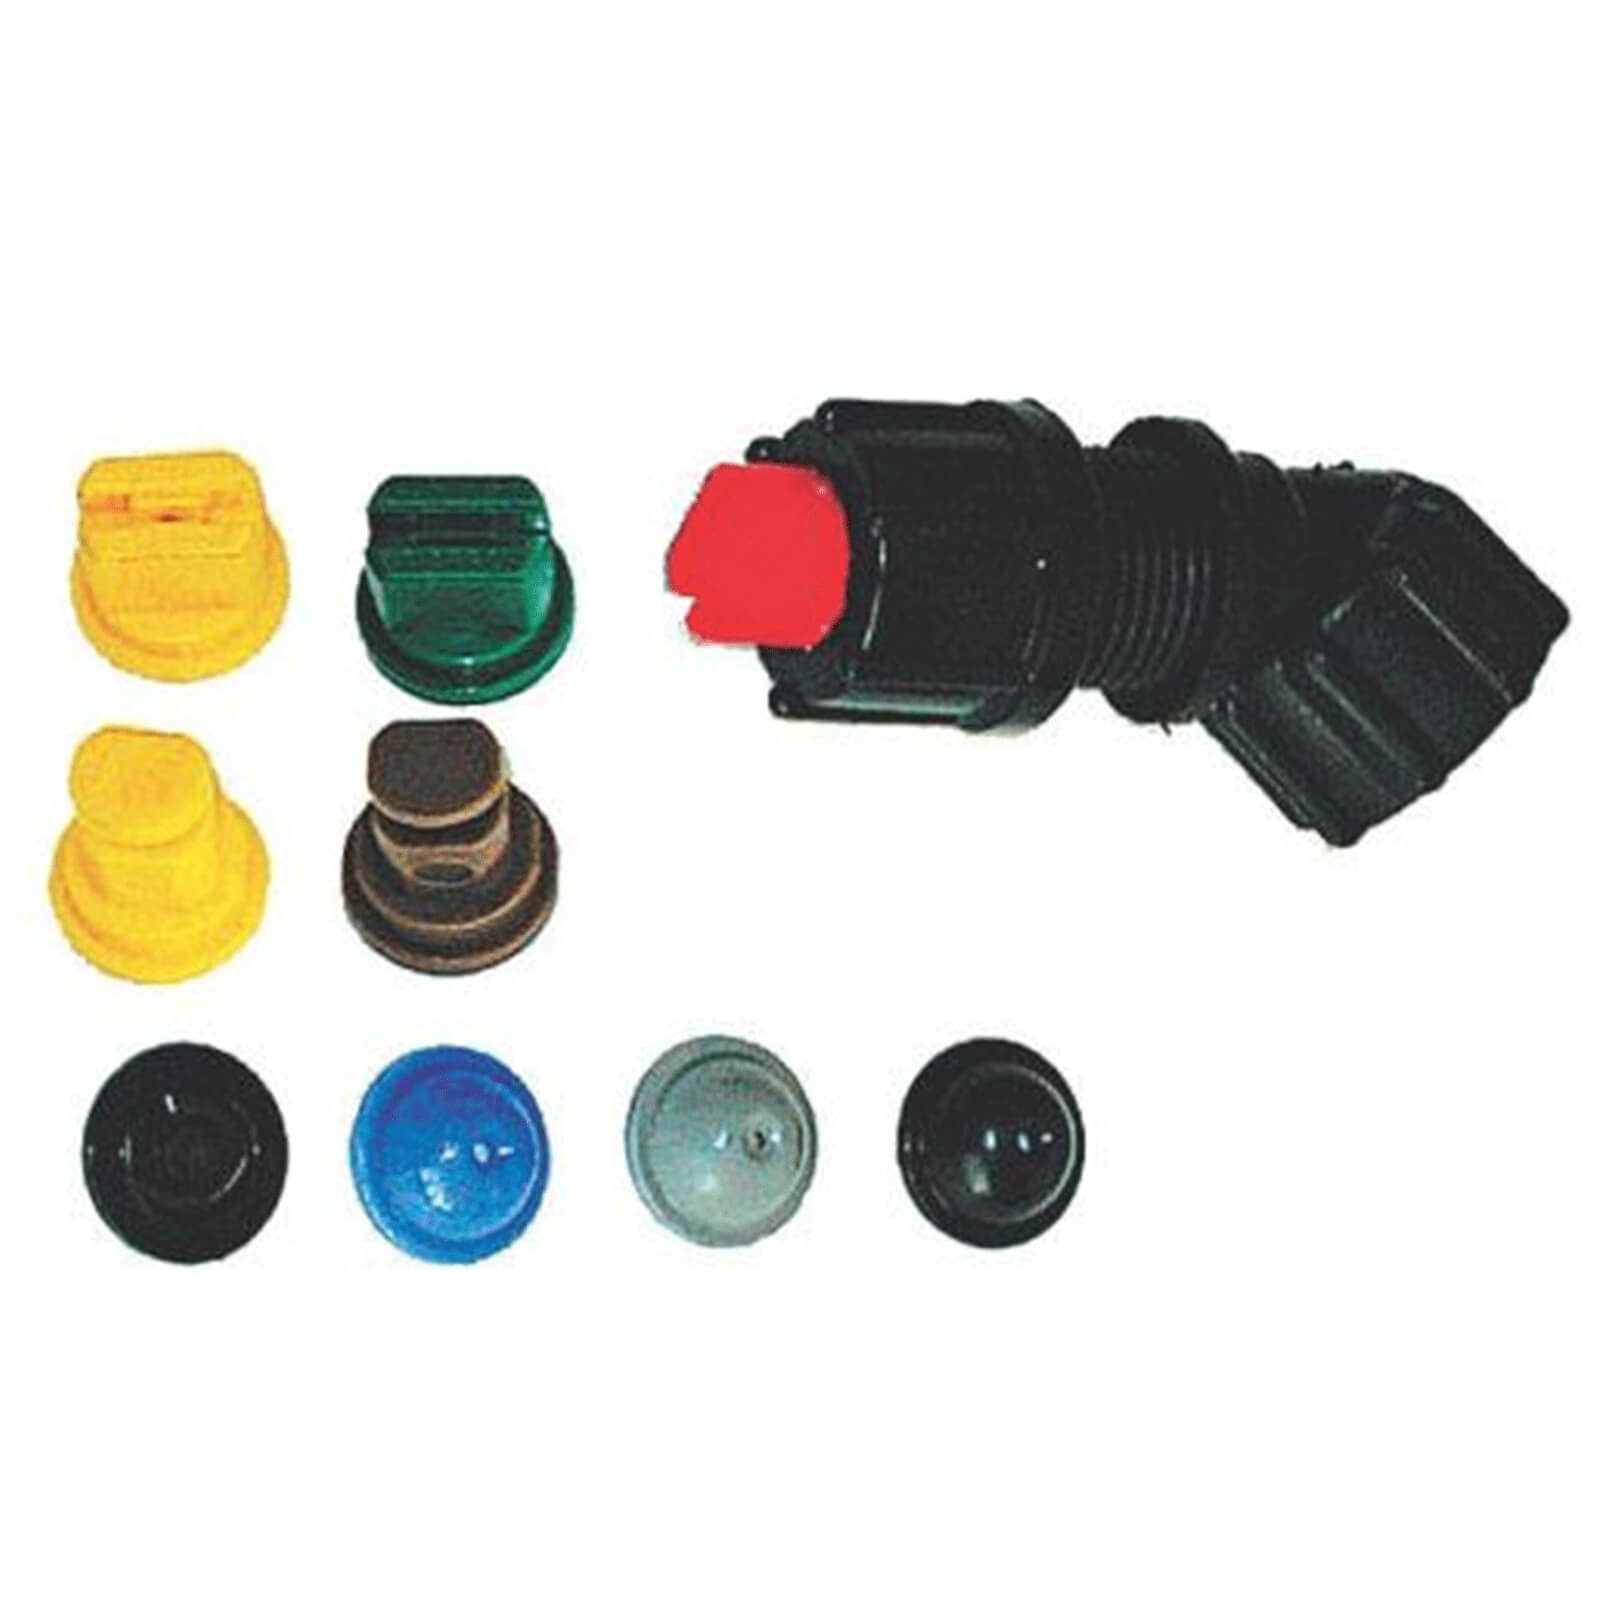 Image of Solo 9 Piece Nozzle Set for Pressure Sprayers